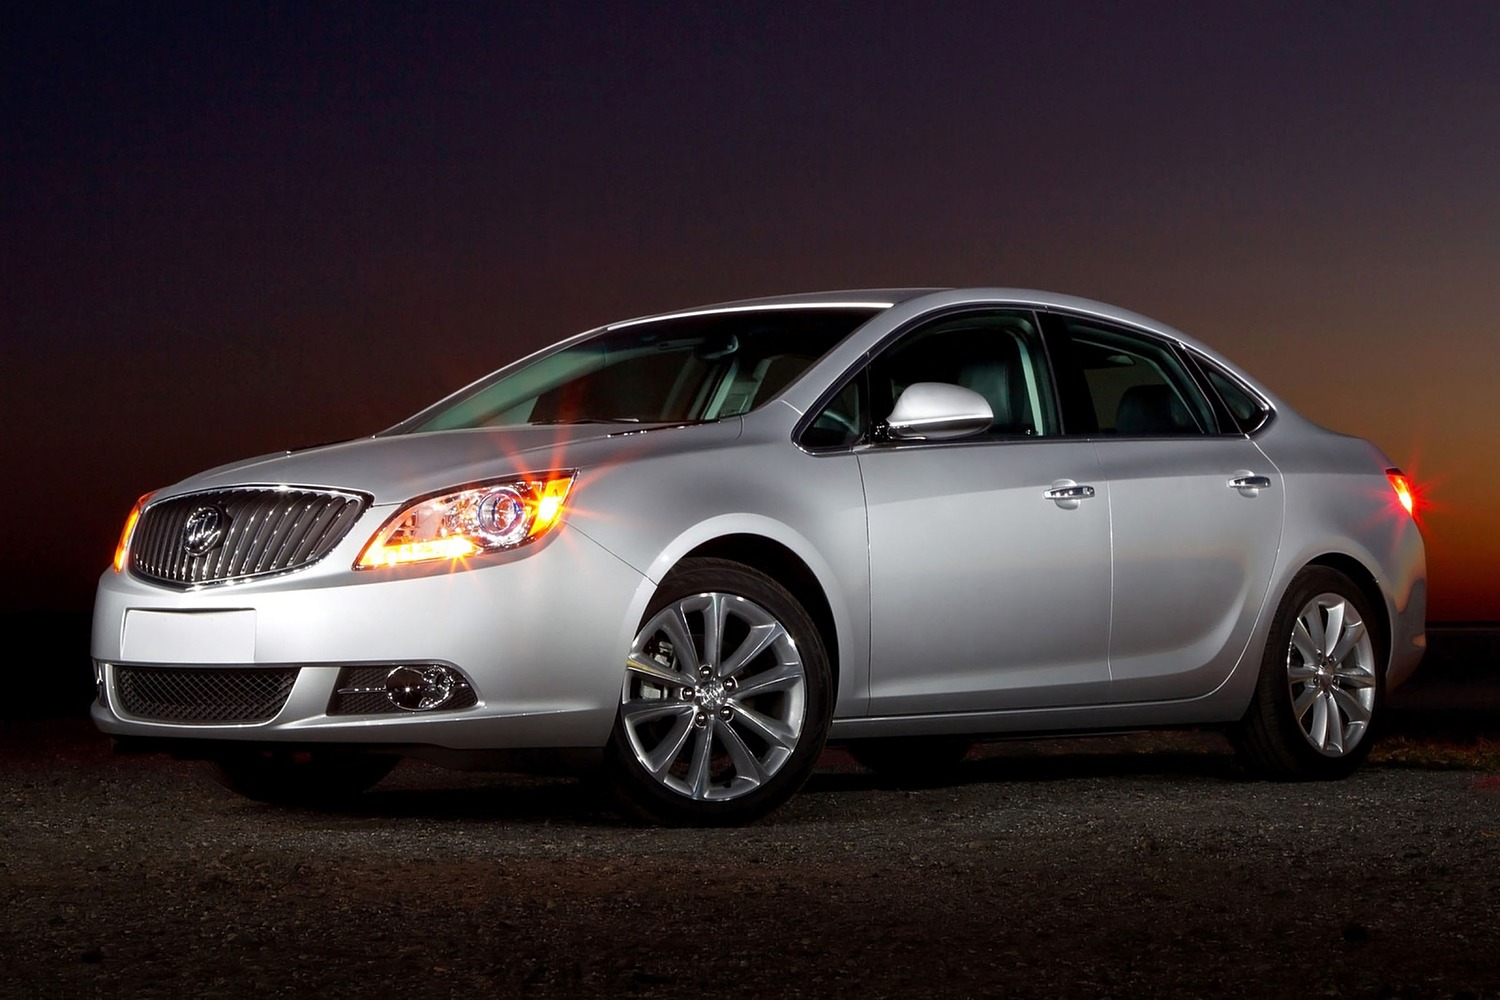 Buick Verano Leather Group Sedan Exterior Shown (2015 model year shown)